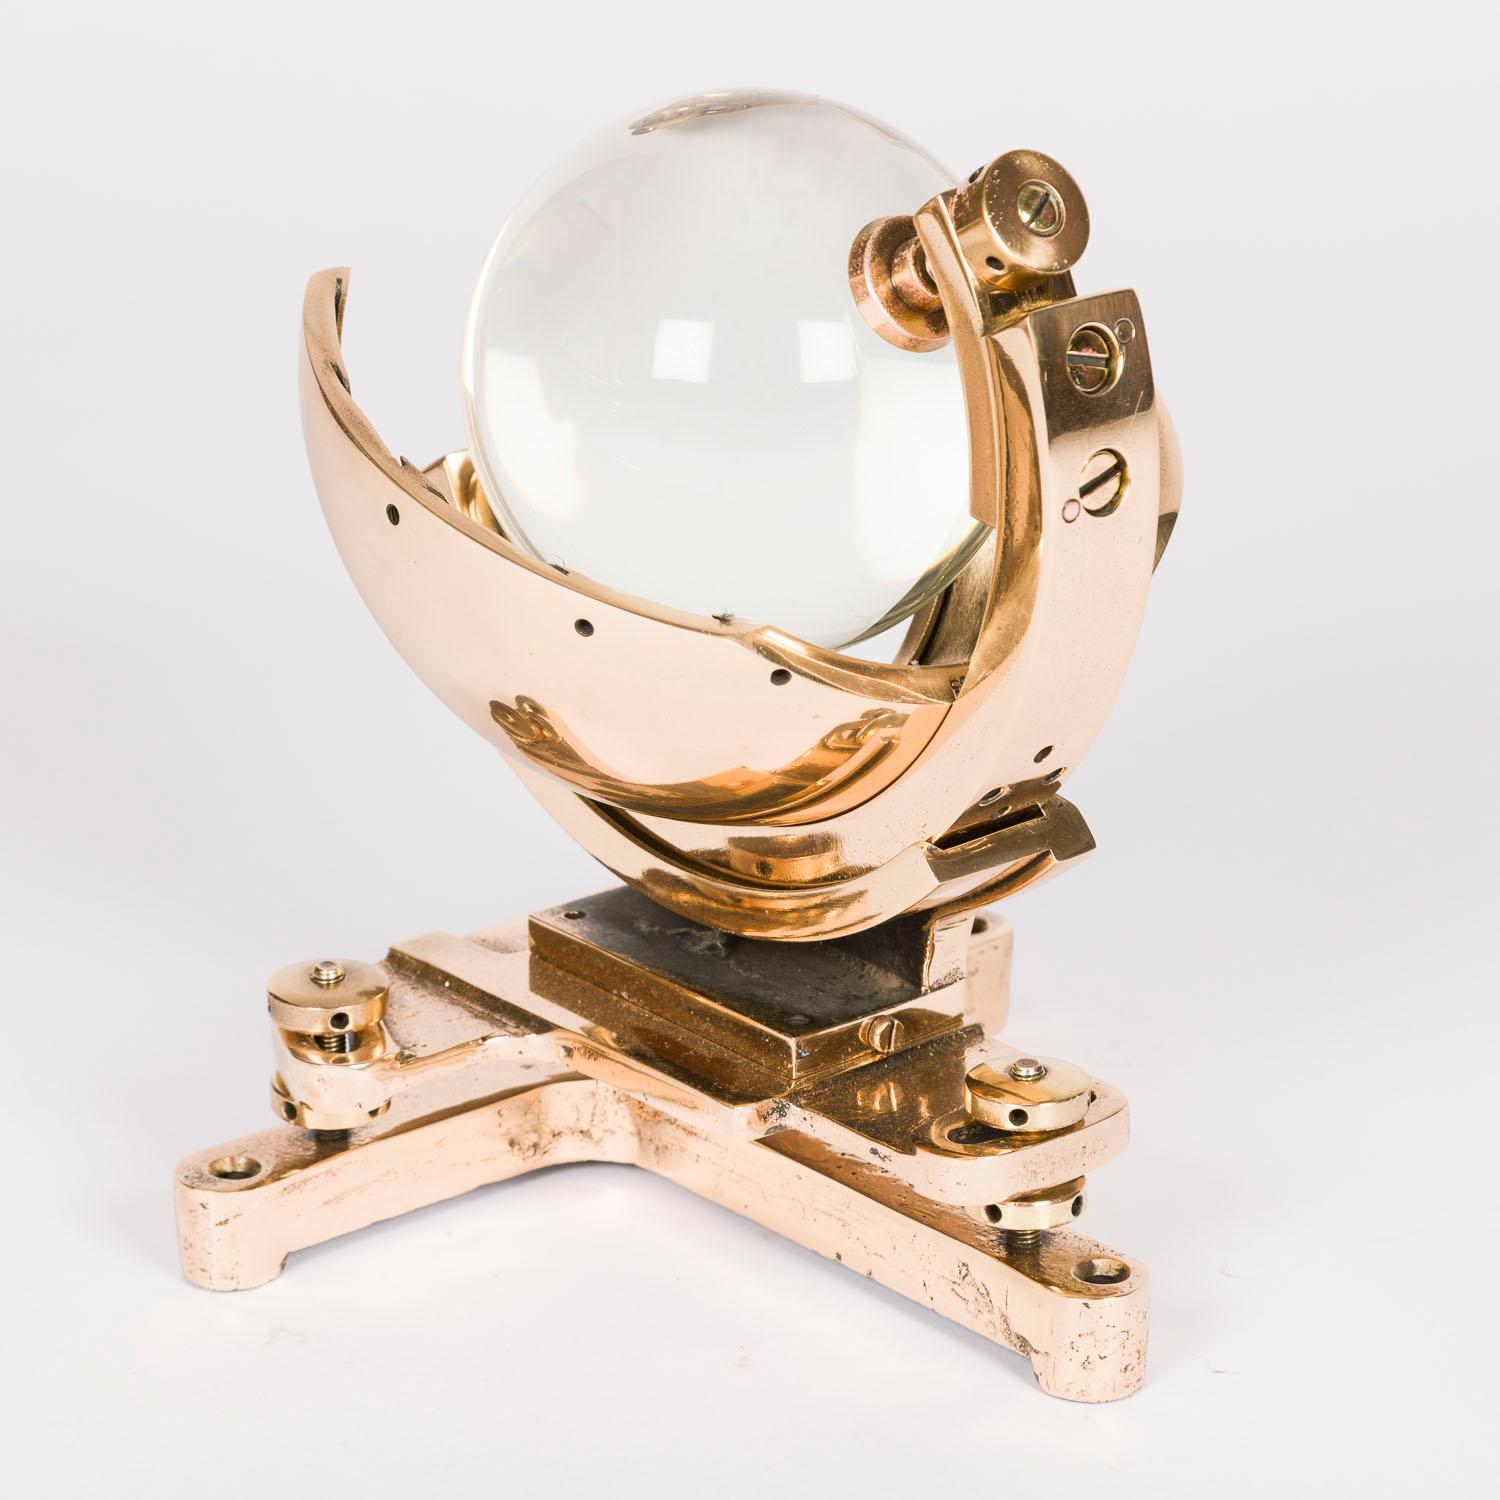 Campbell–Stokes sunshine recorder by Casella & Co of London For Sale 1